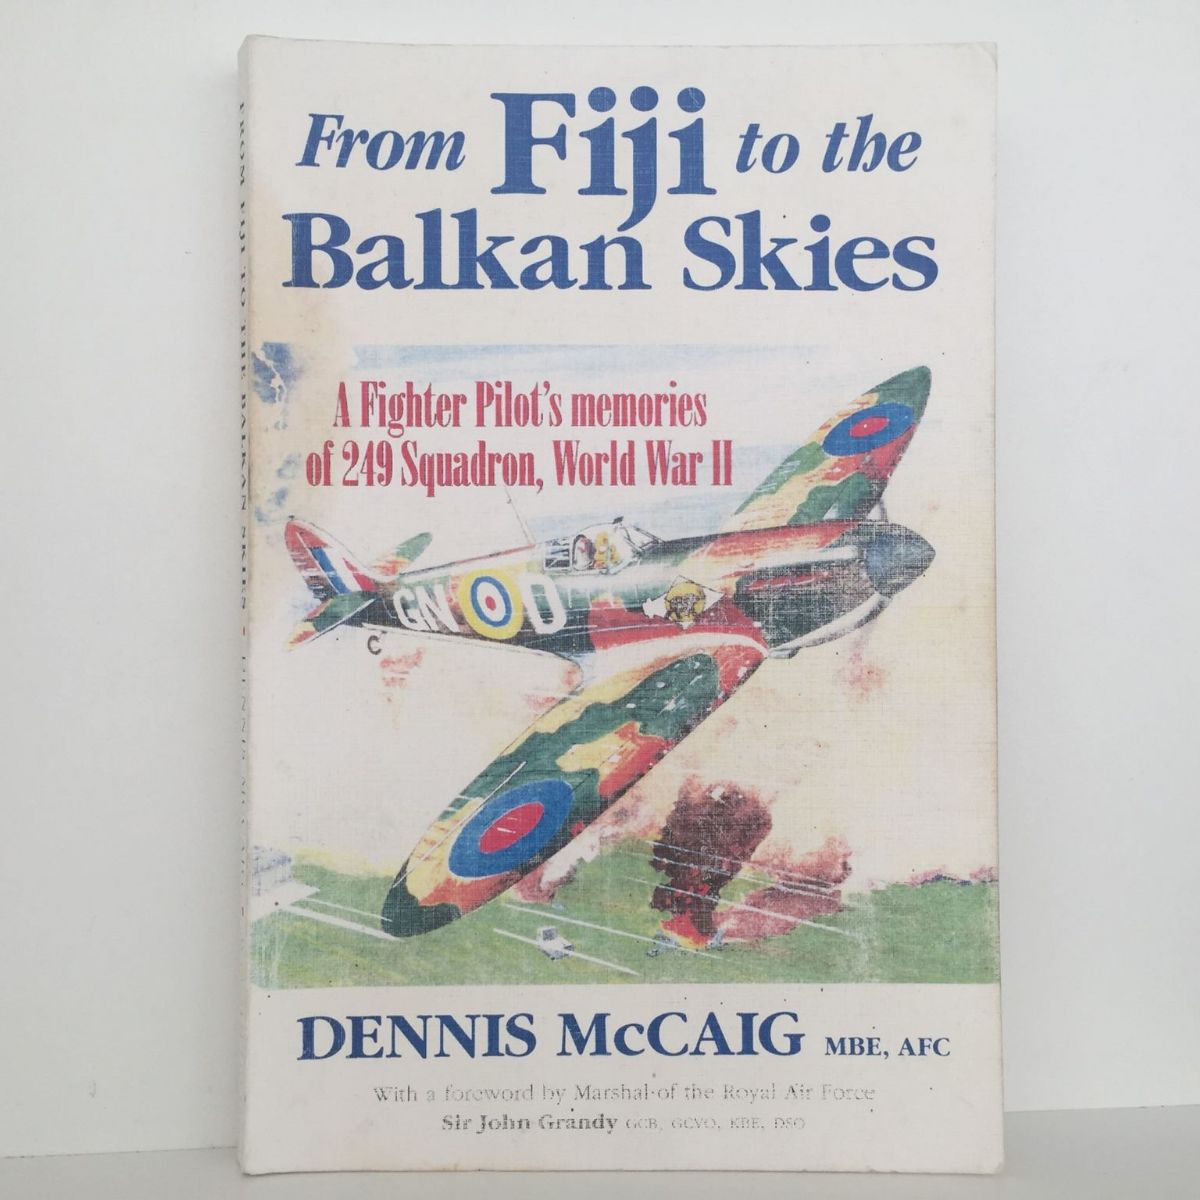 From Fiji To Balkan Skies: A Fighter Pilot's Memories of 249 Squadron In WW II